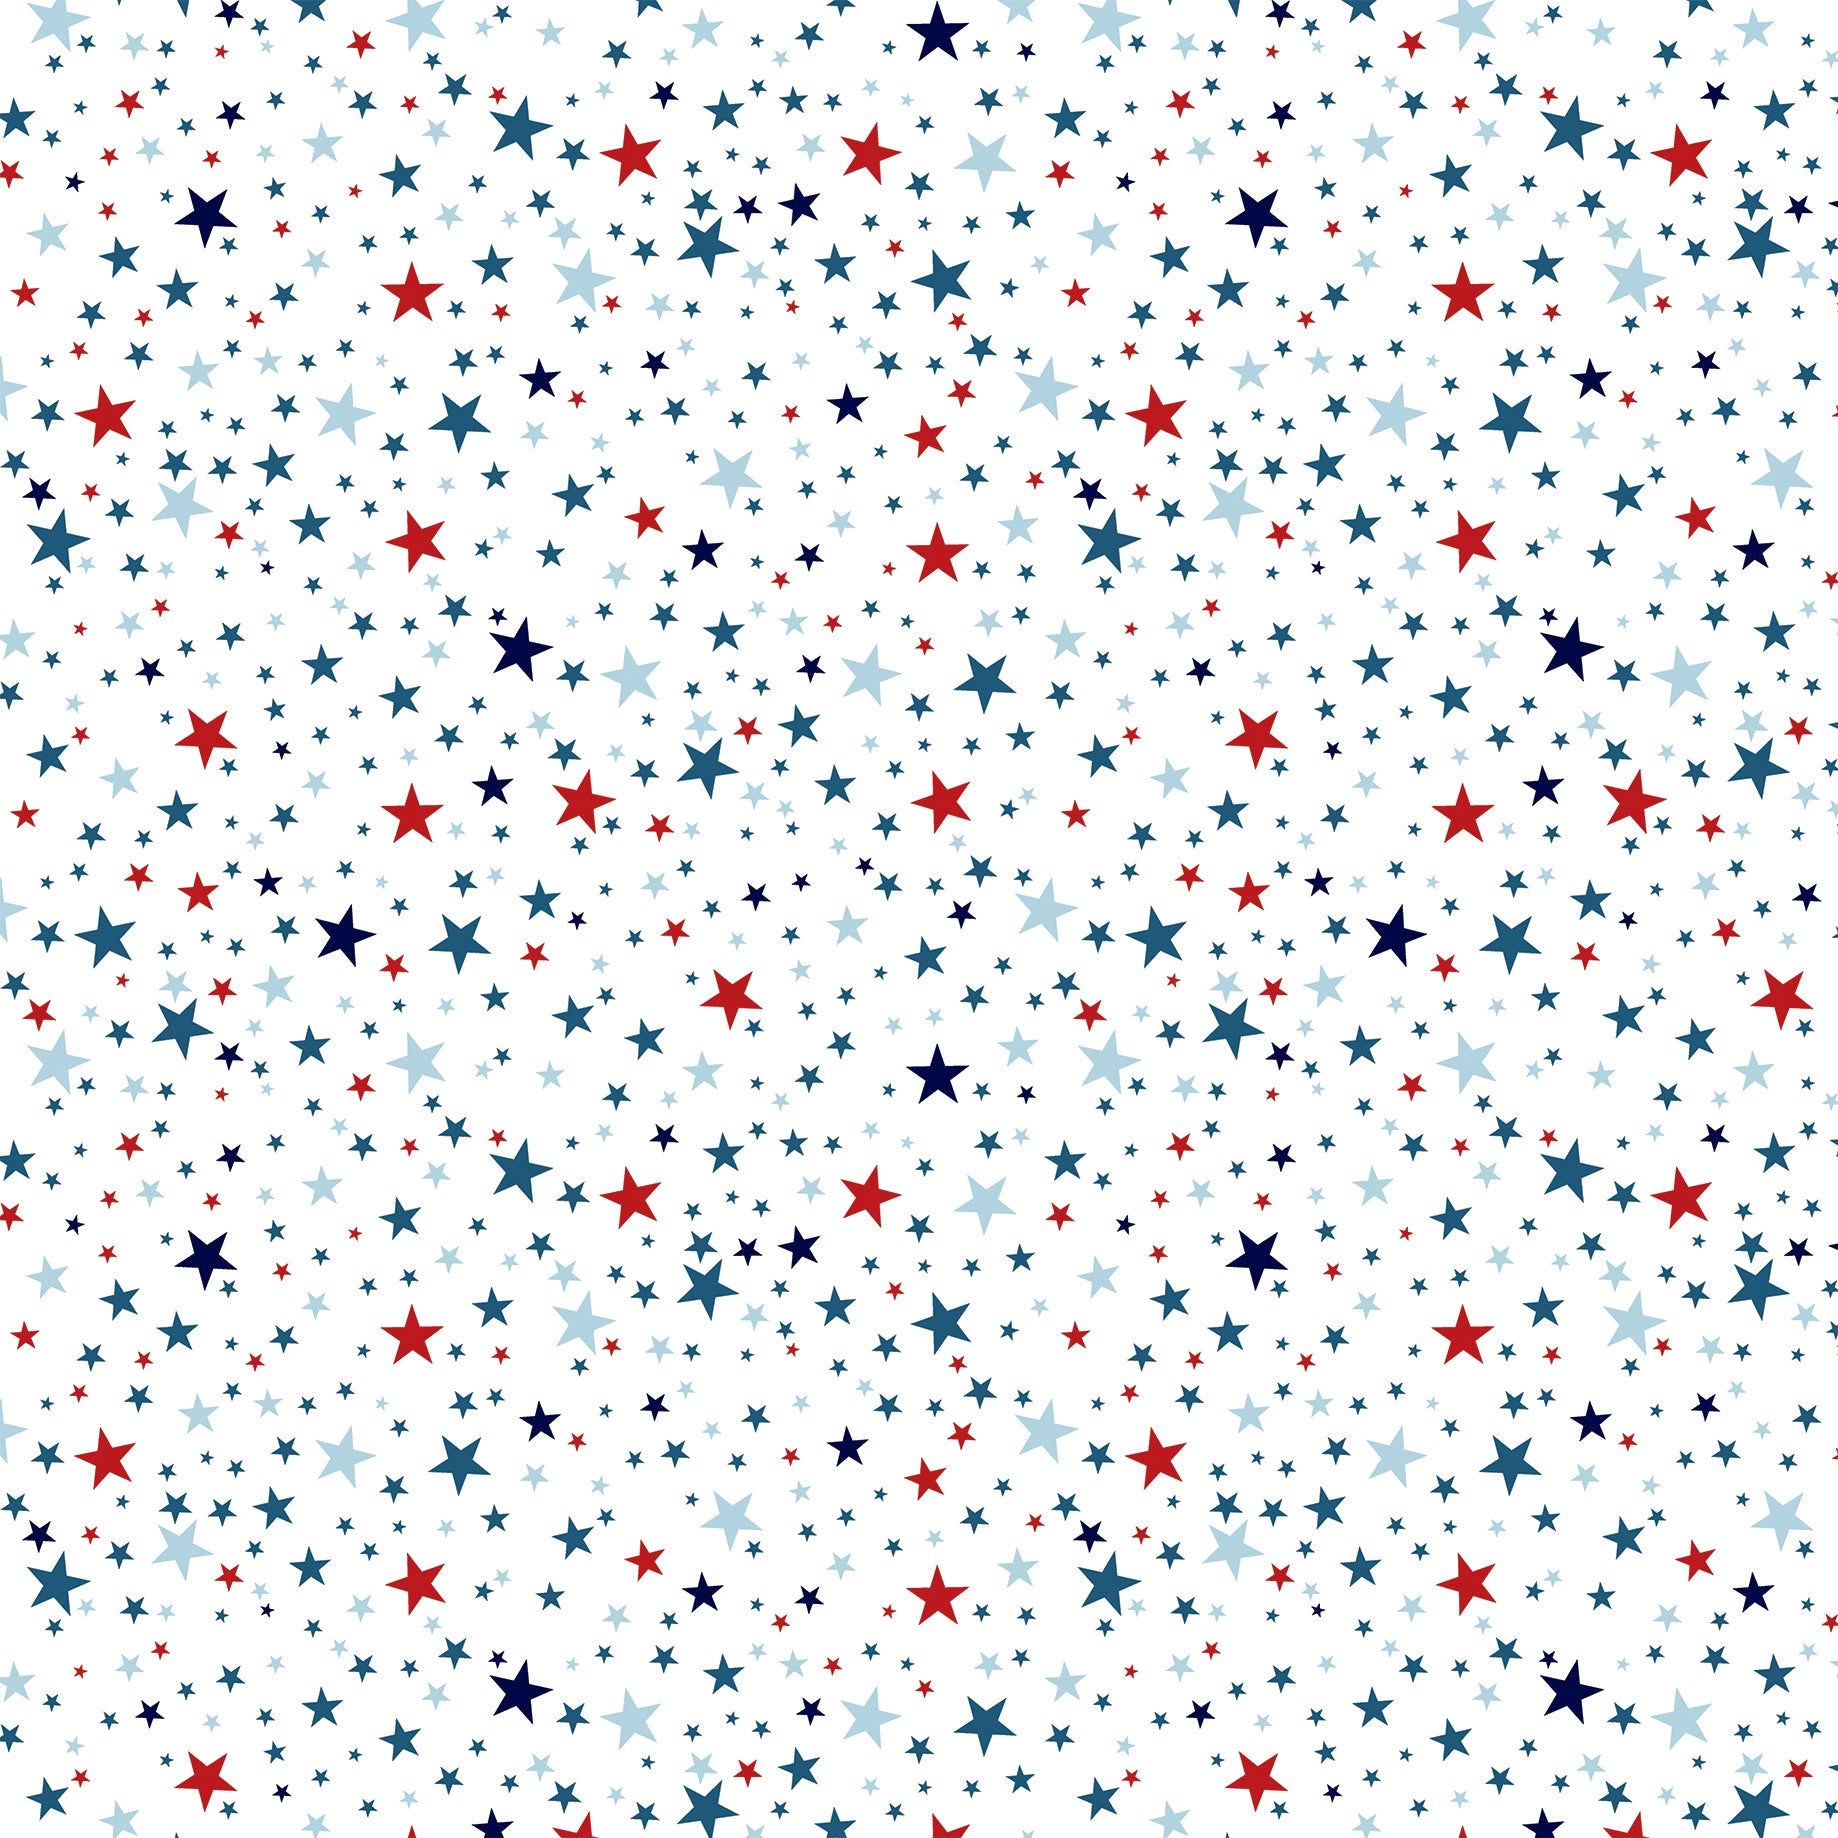 Stars and Stripes Forever Collection Spirited Stars 12 x 12 Double-Sided Scrapbook Paper by Echo Park Paper